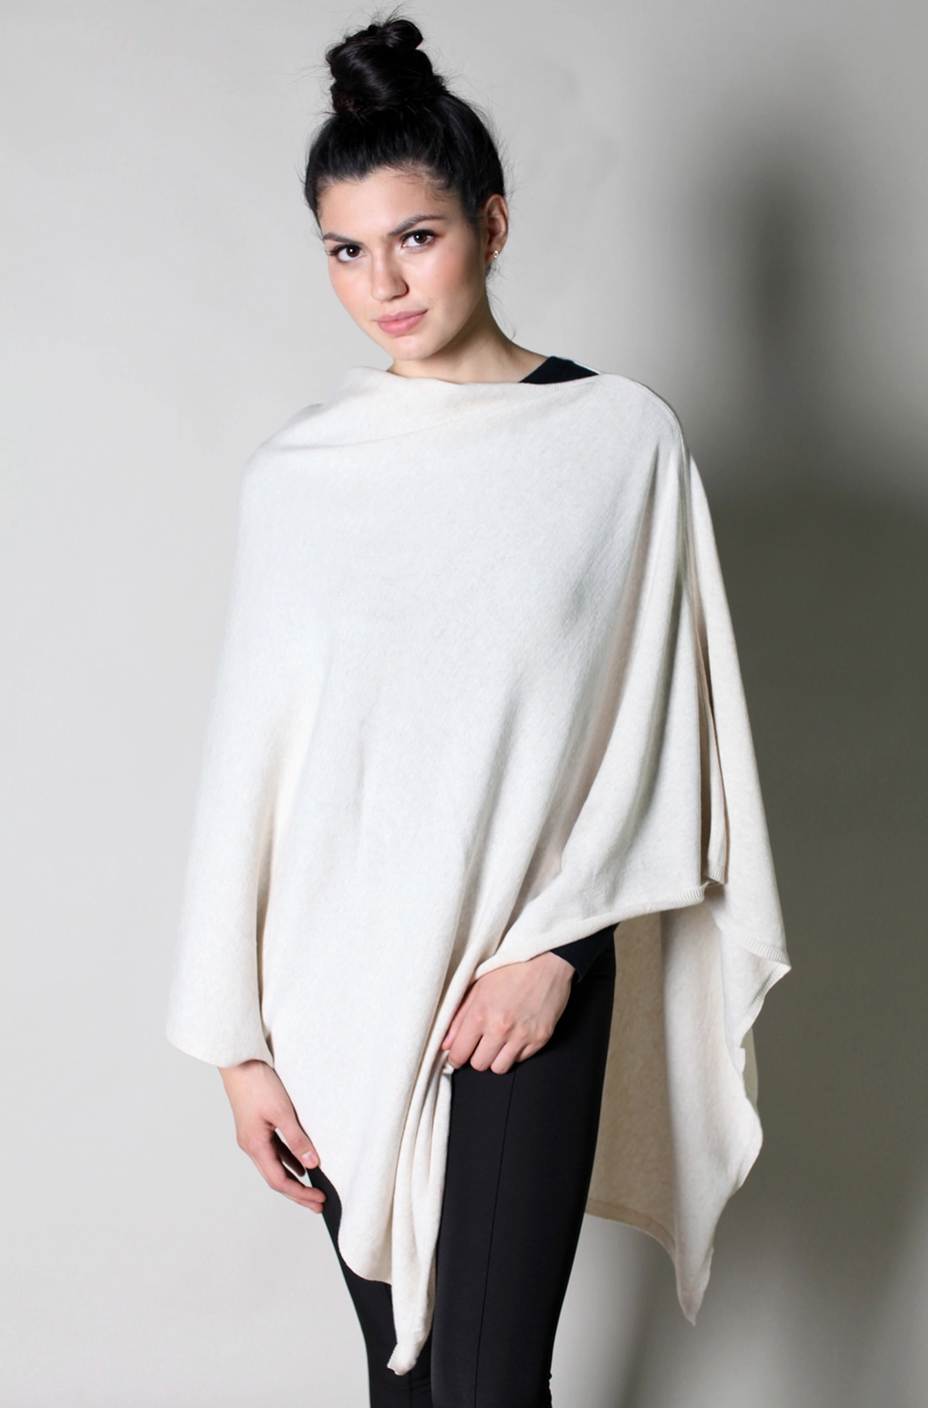 Women’s Eco-Chic Poncho Sweater Knit Pullover